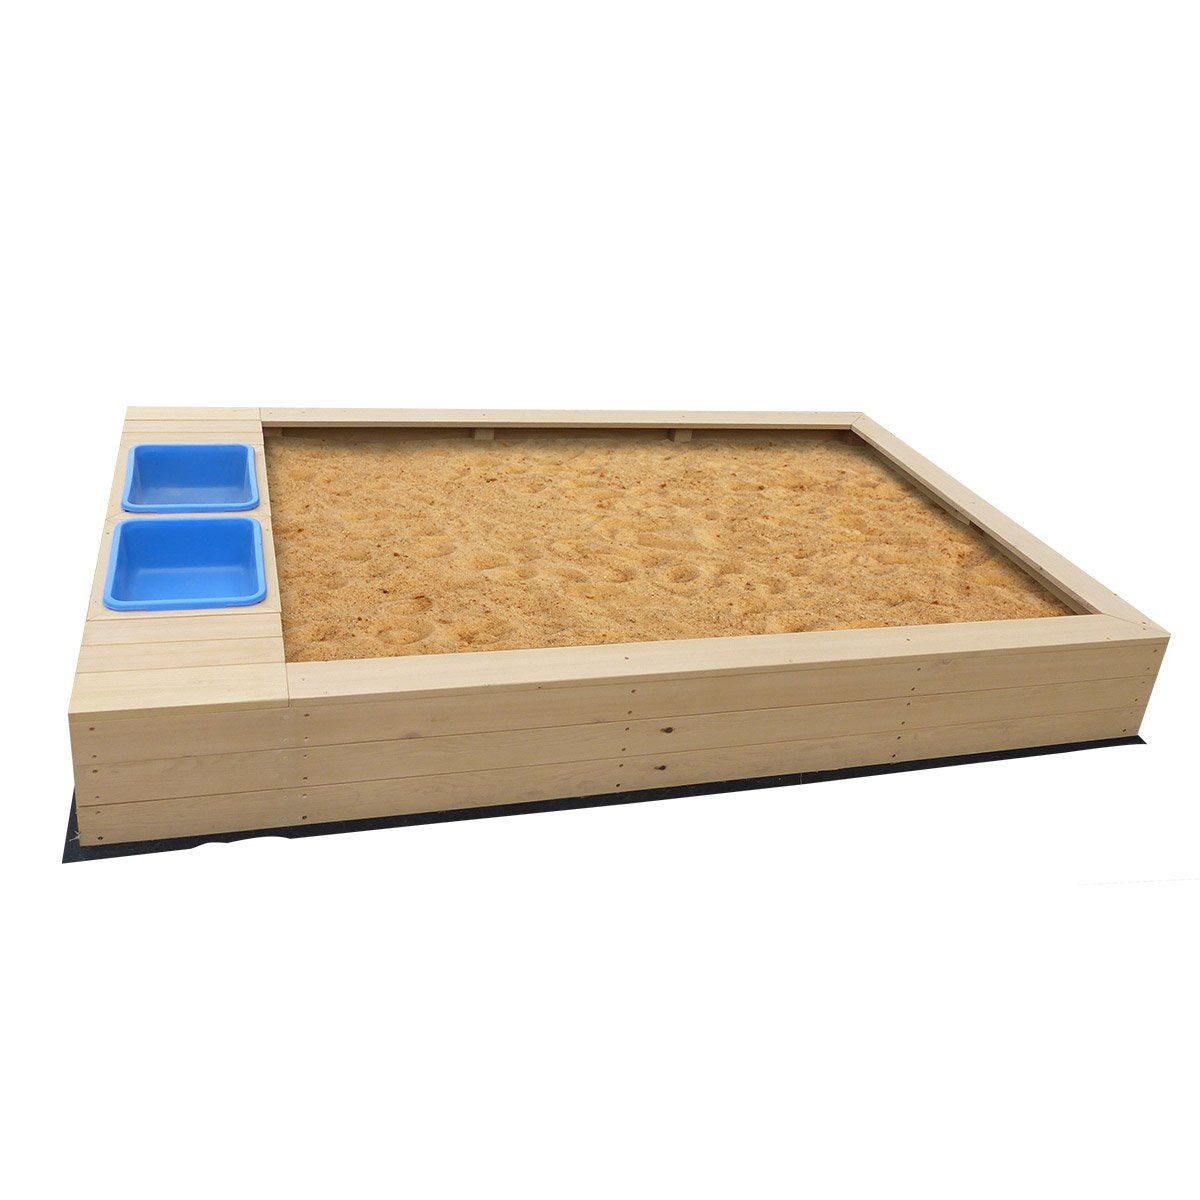 Lifespan Kids Mighty Sandpit with Cover